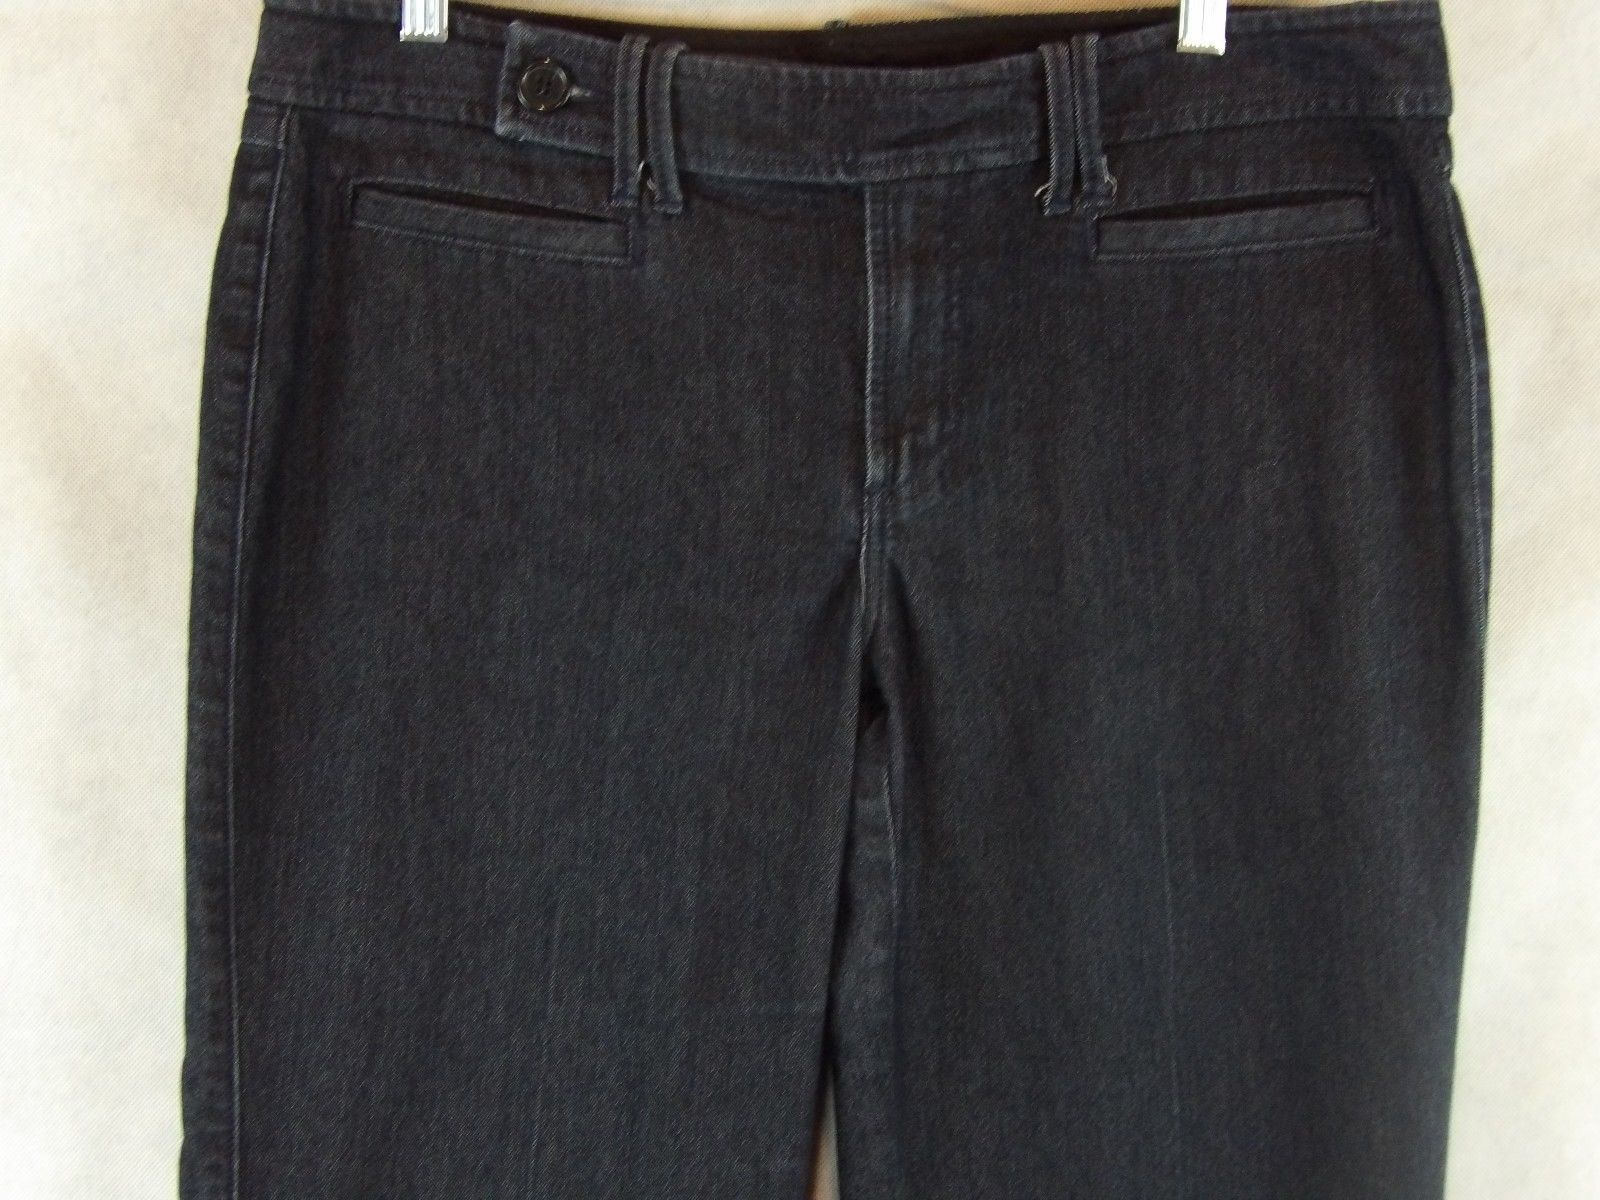 size 27 jeans in us womens